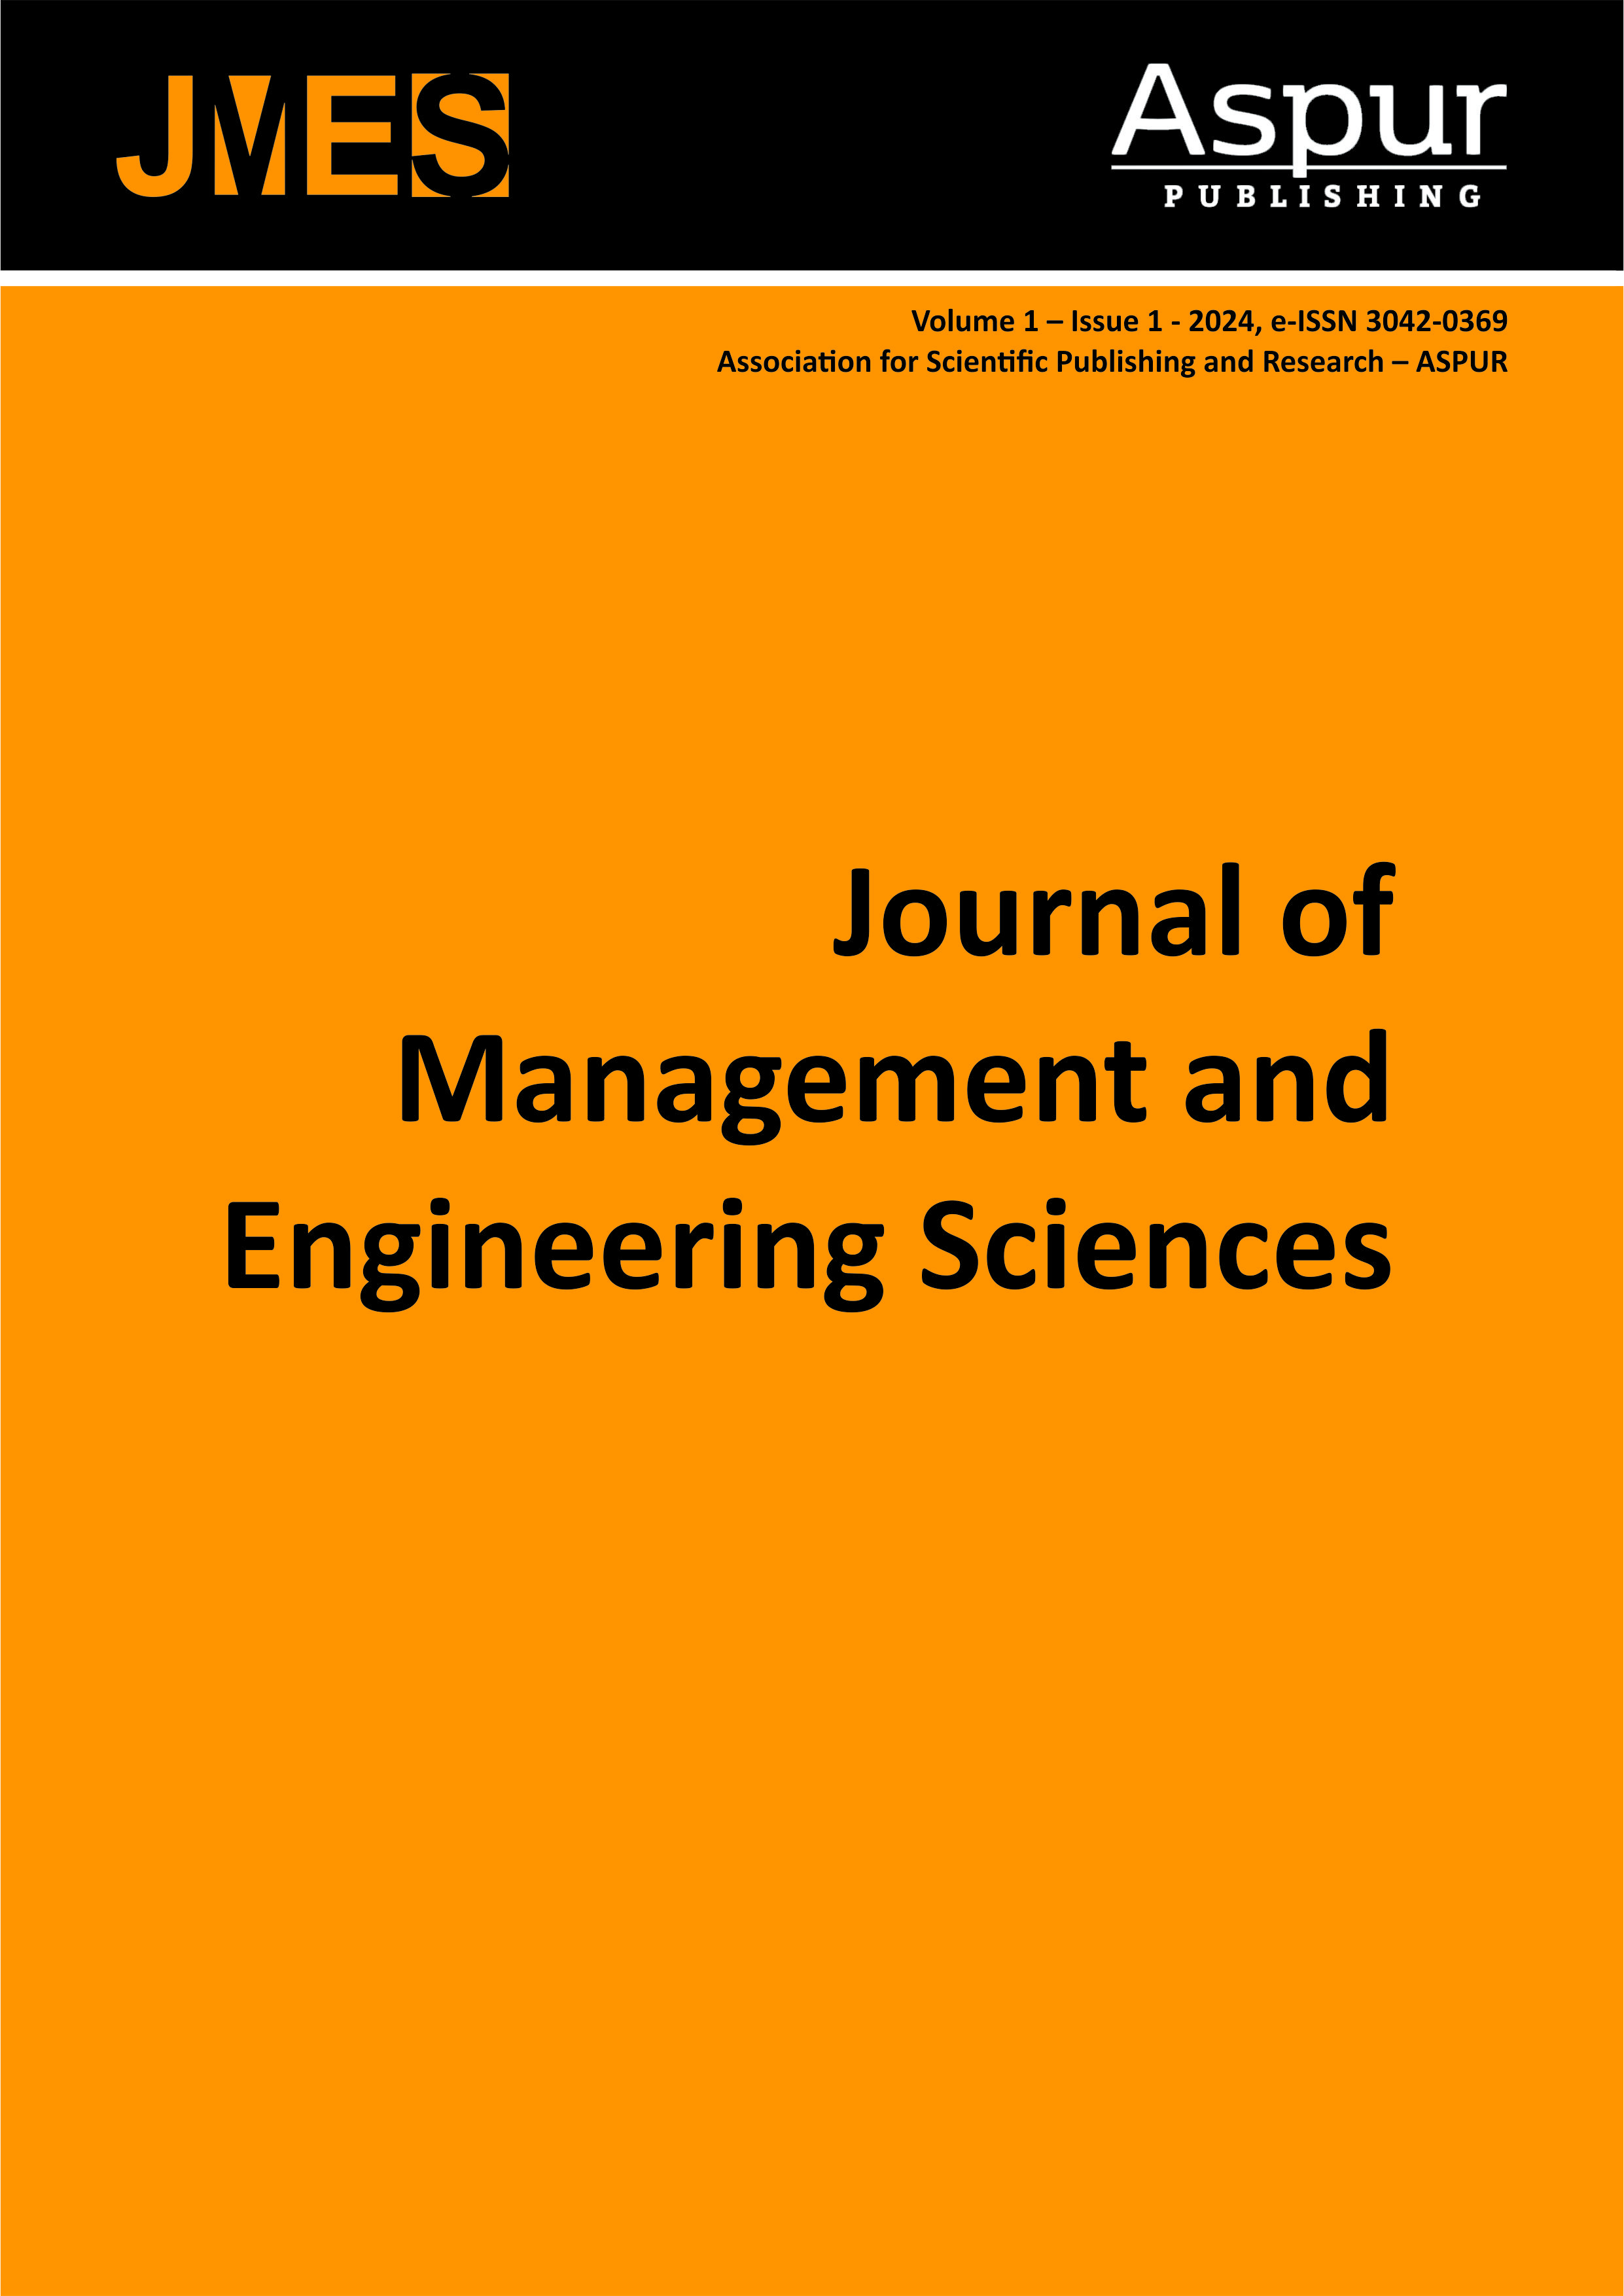 Journal of Management and Engineering Sciences